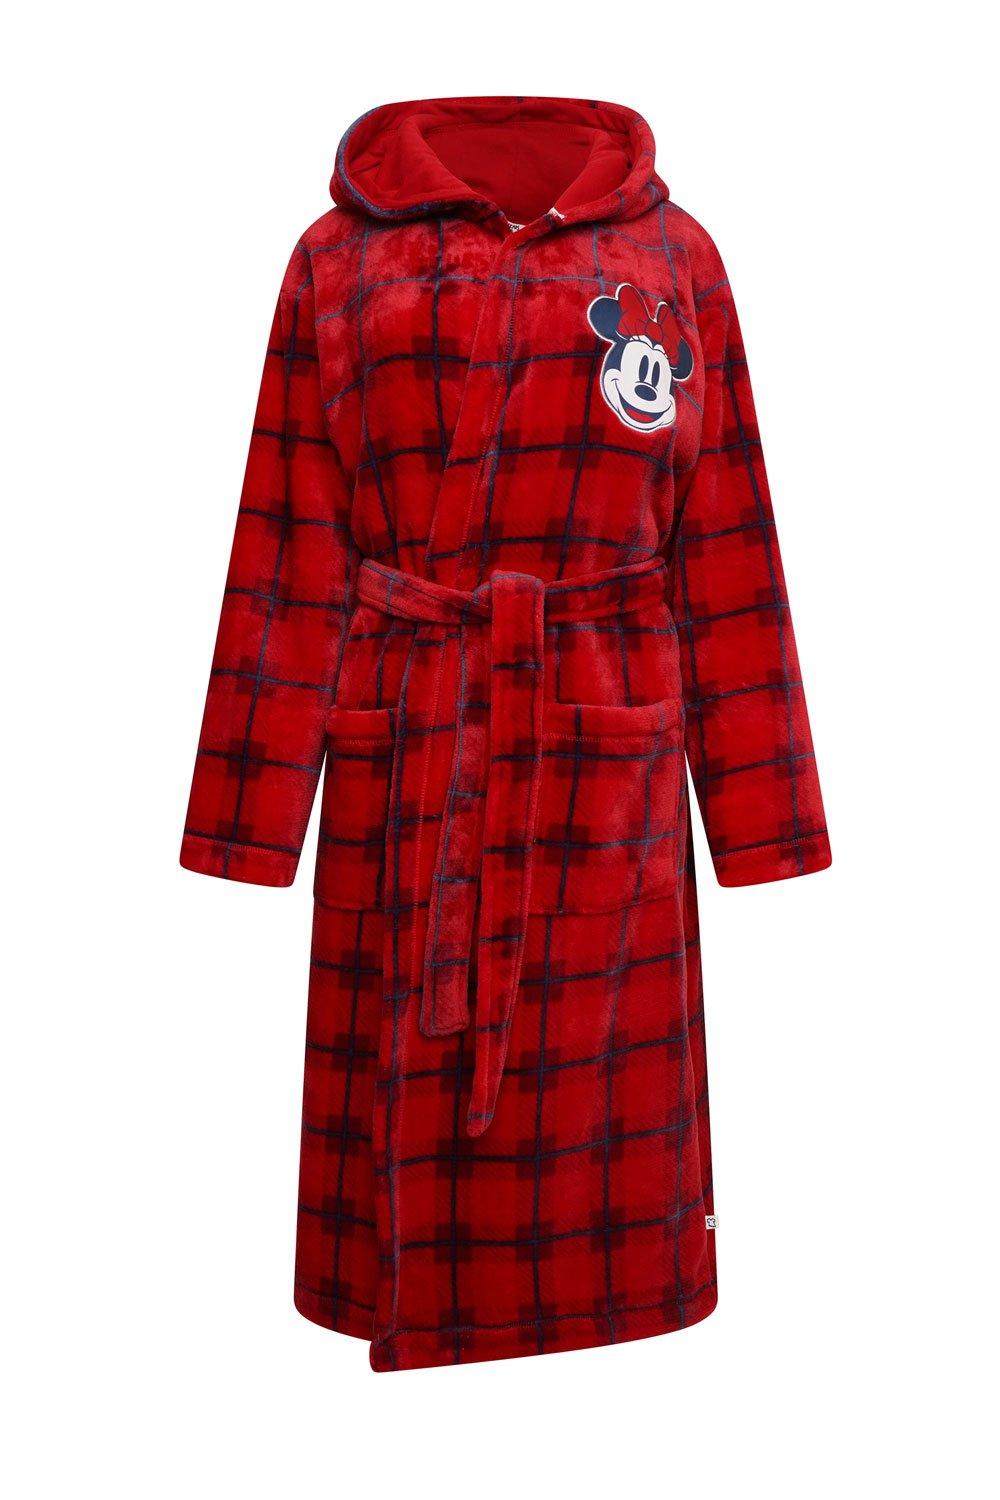 Minnie Mouse Family Robe